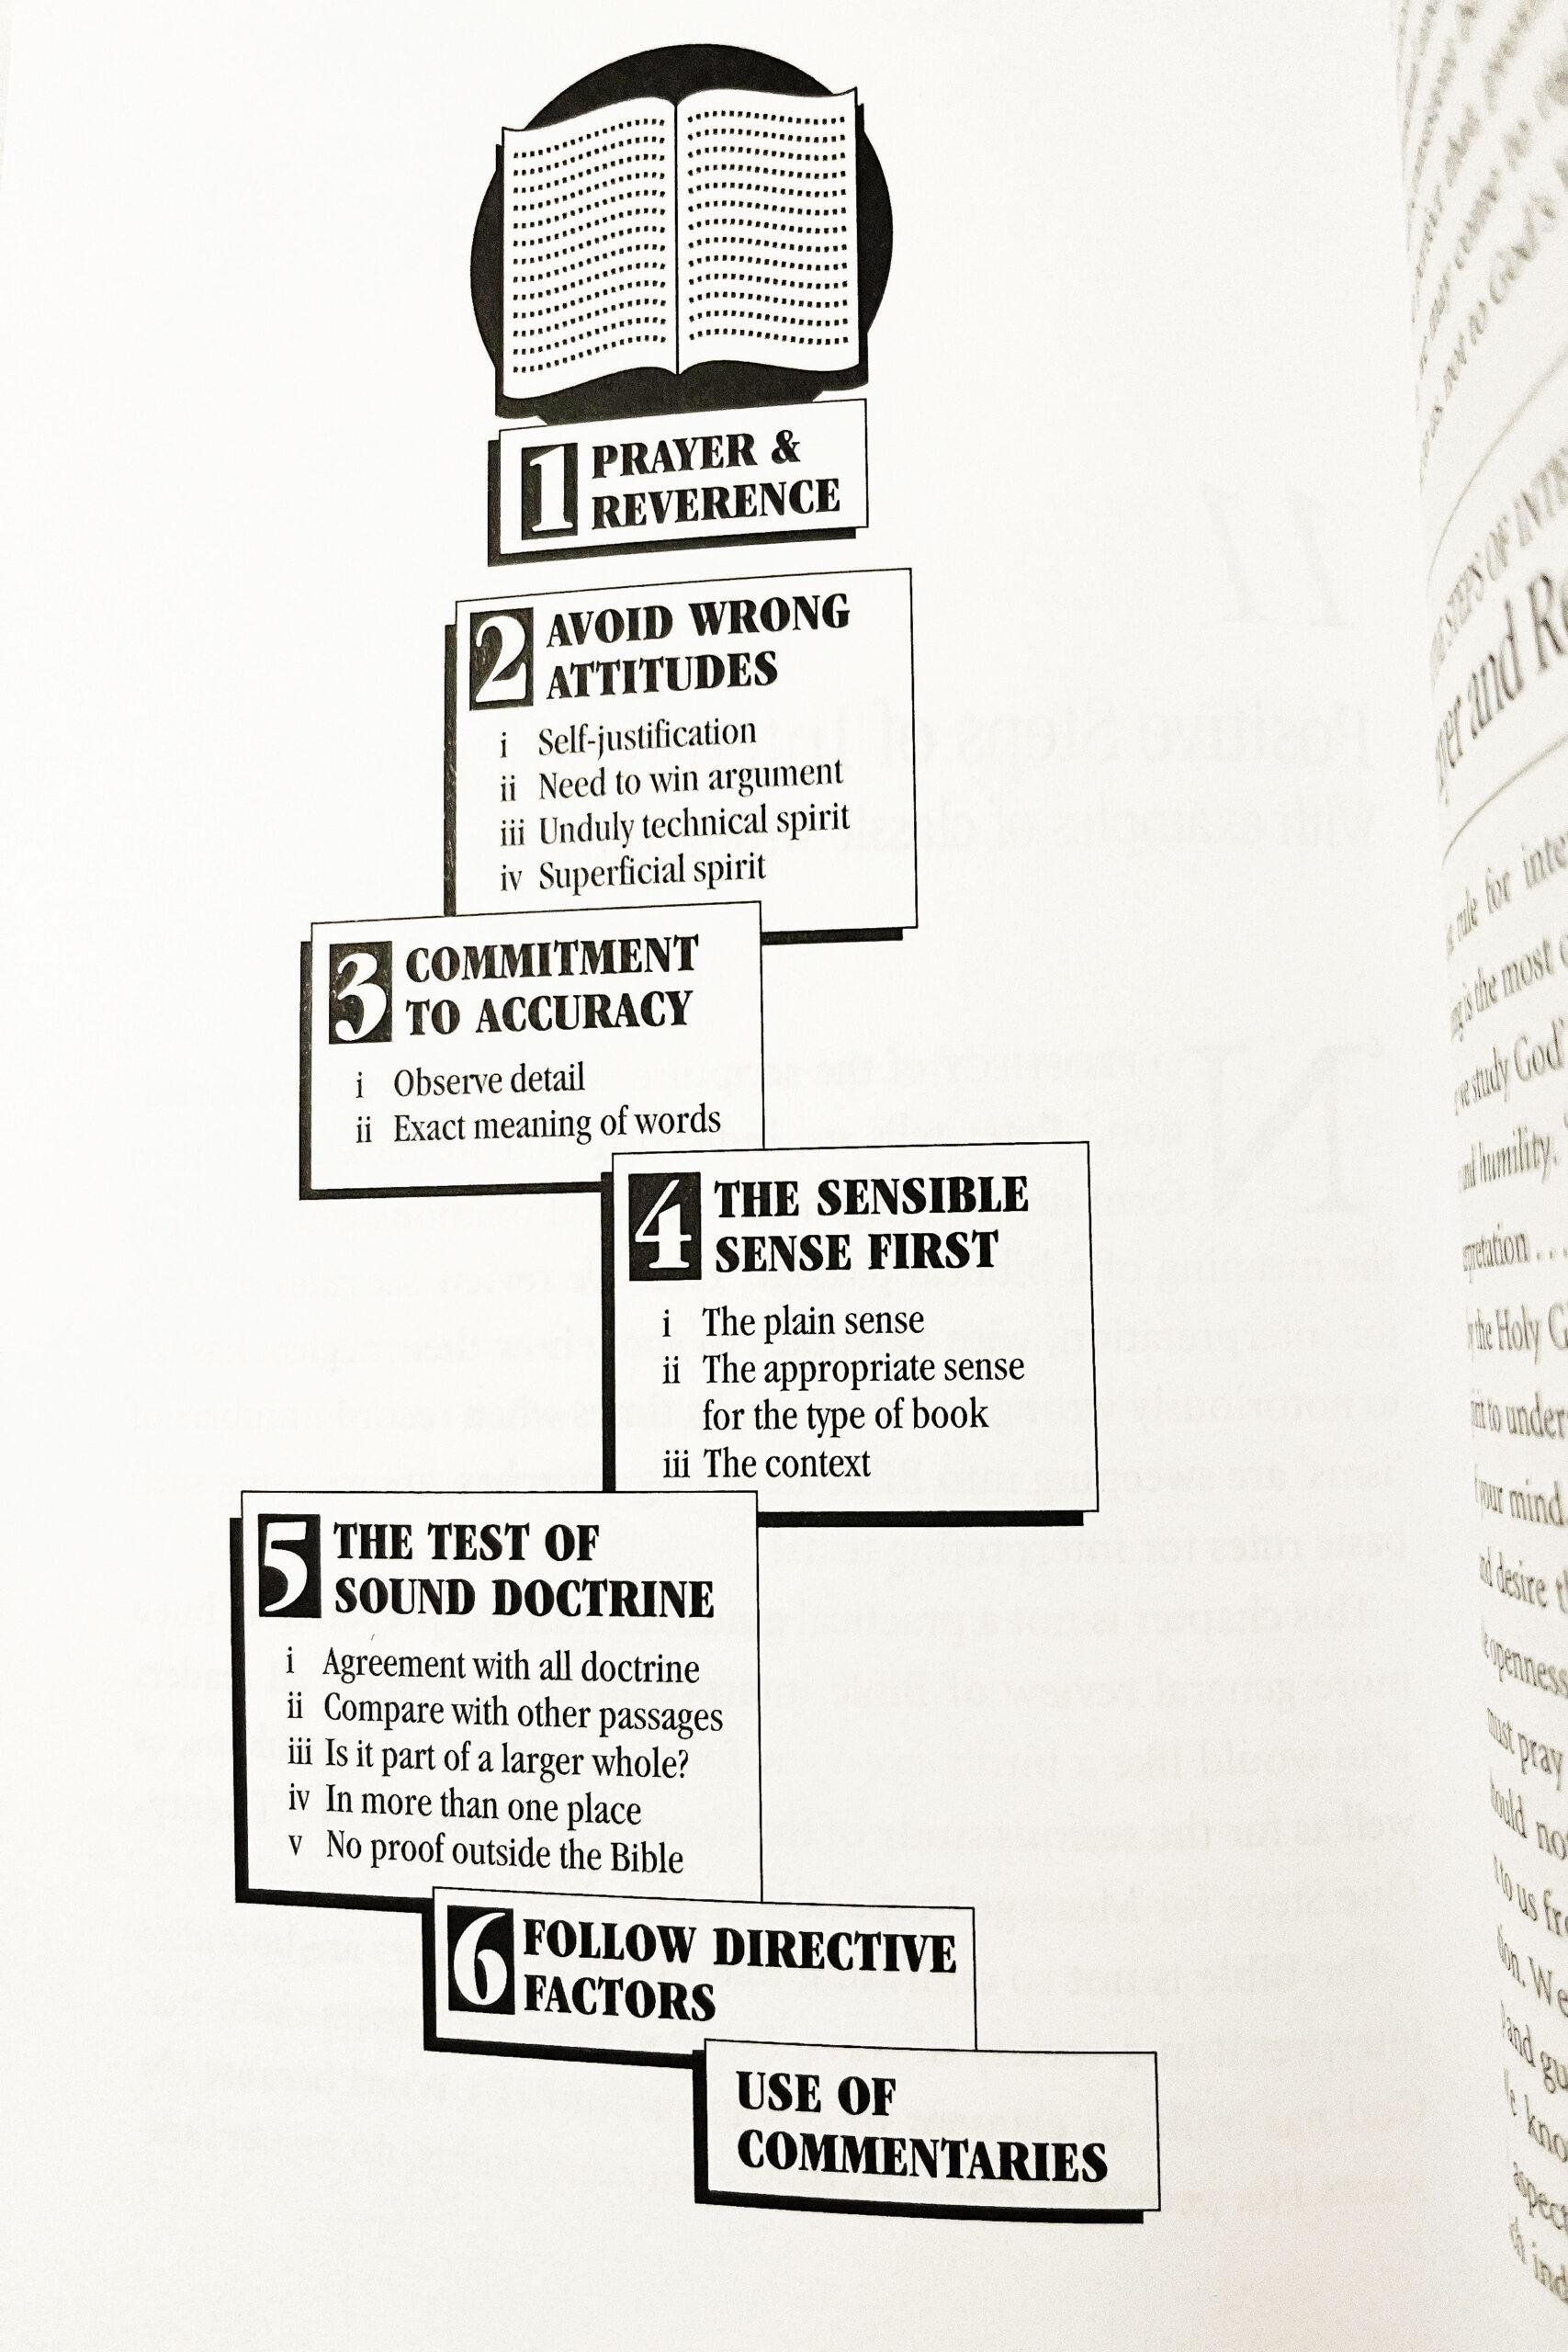 Positive steps of Interpretation diagram from Interpreting the Bible Not like any other book 